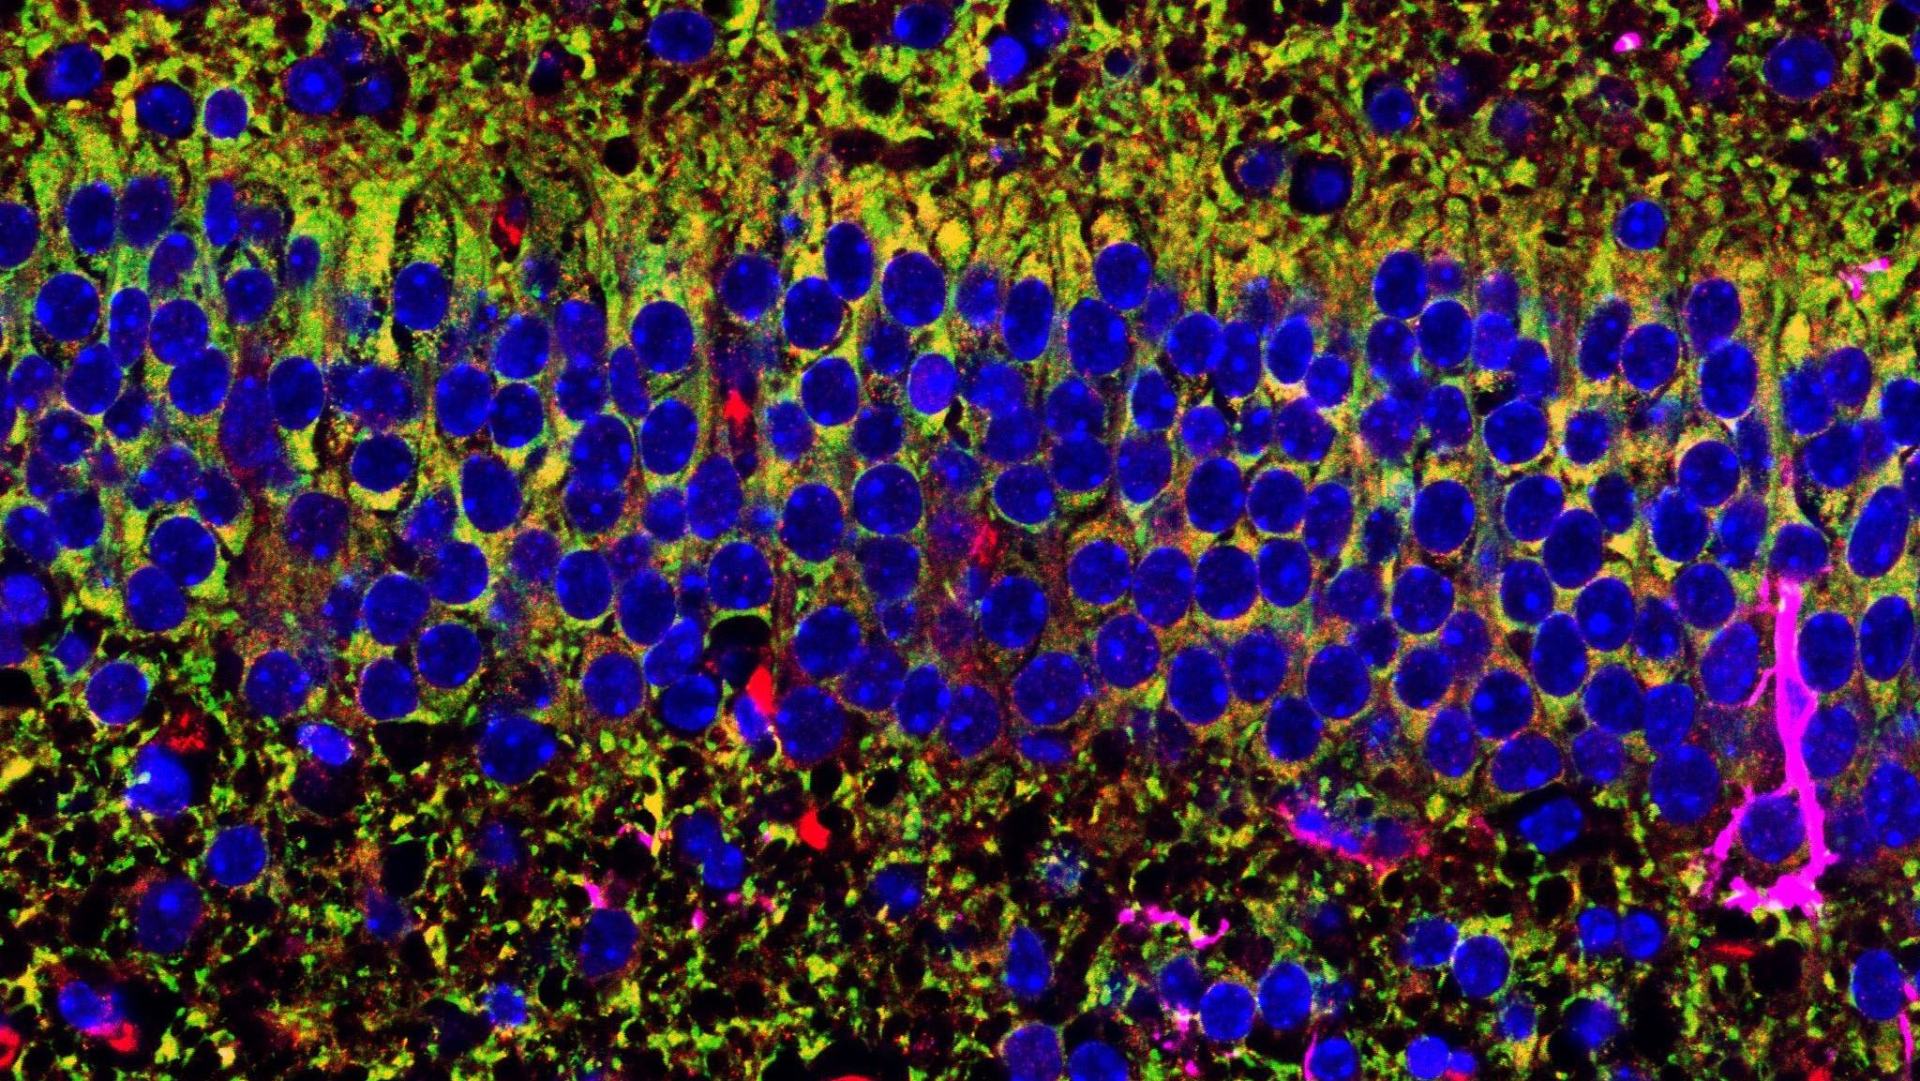 The immune system orchestrates neurodevelopment in the hippocampus